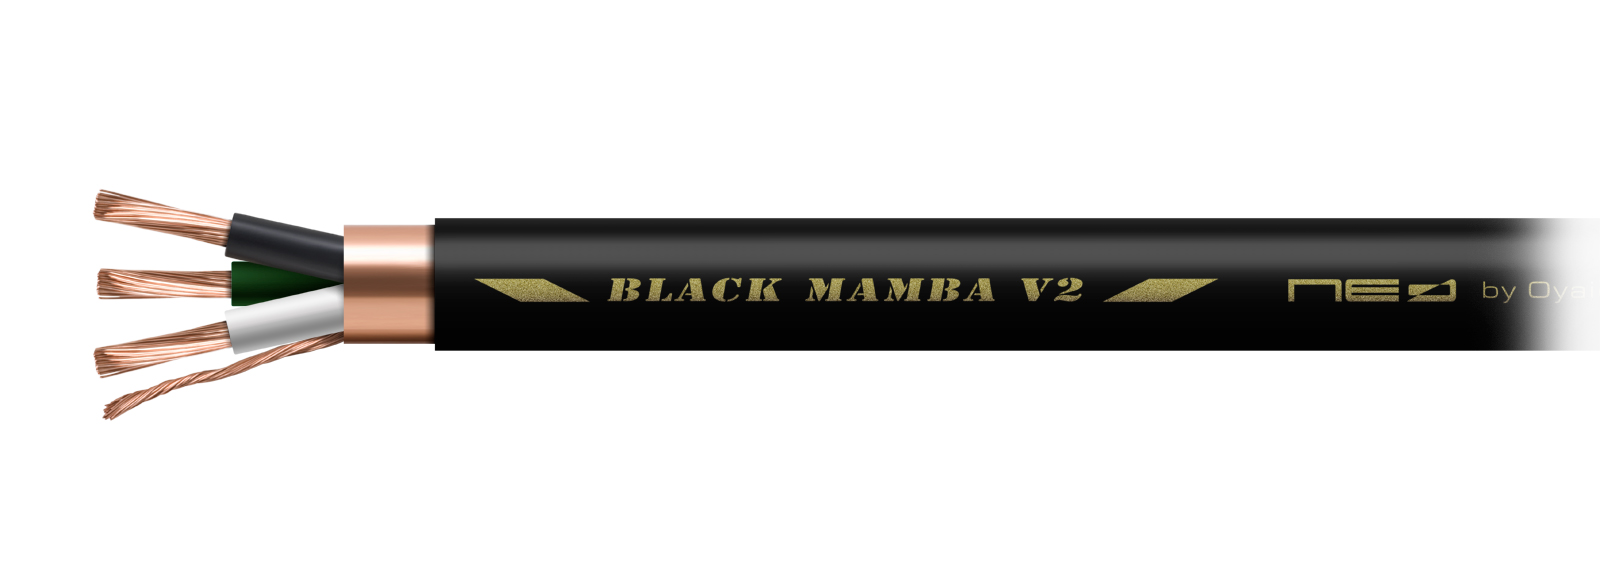 BLACKMAMBA_CABLE_001WH_1600w.jpg